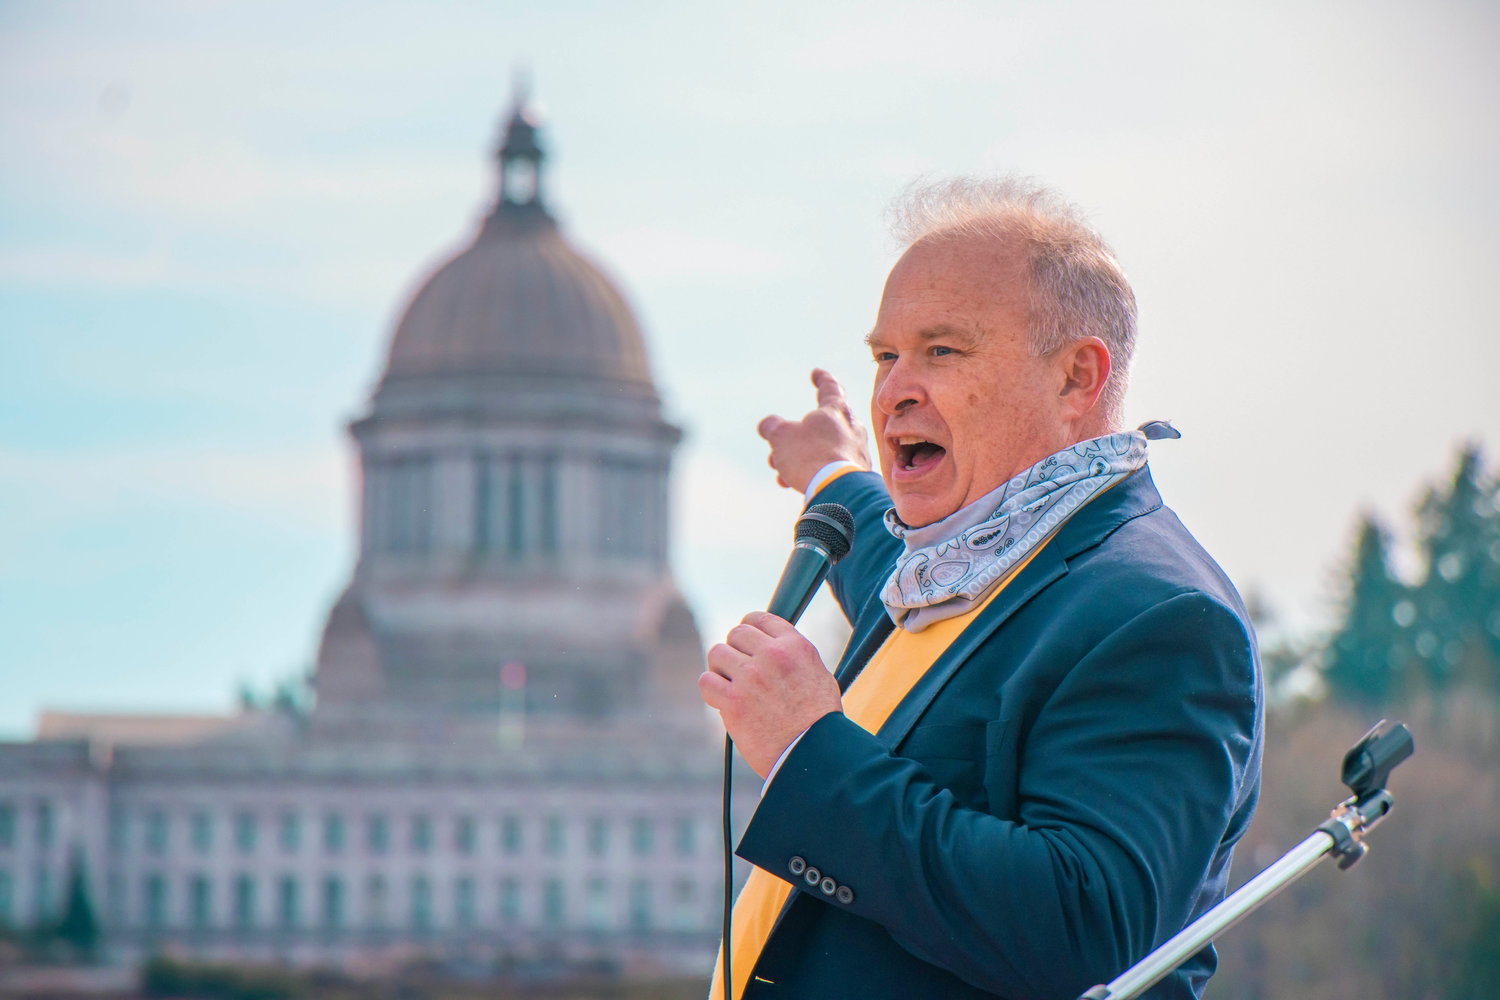 FILE PHOTO — State Rep. Jim Walsh points to the Washington State Capitol during a rally in support of bringing back in-person schooling.